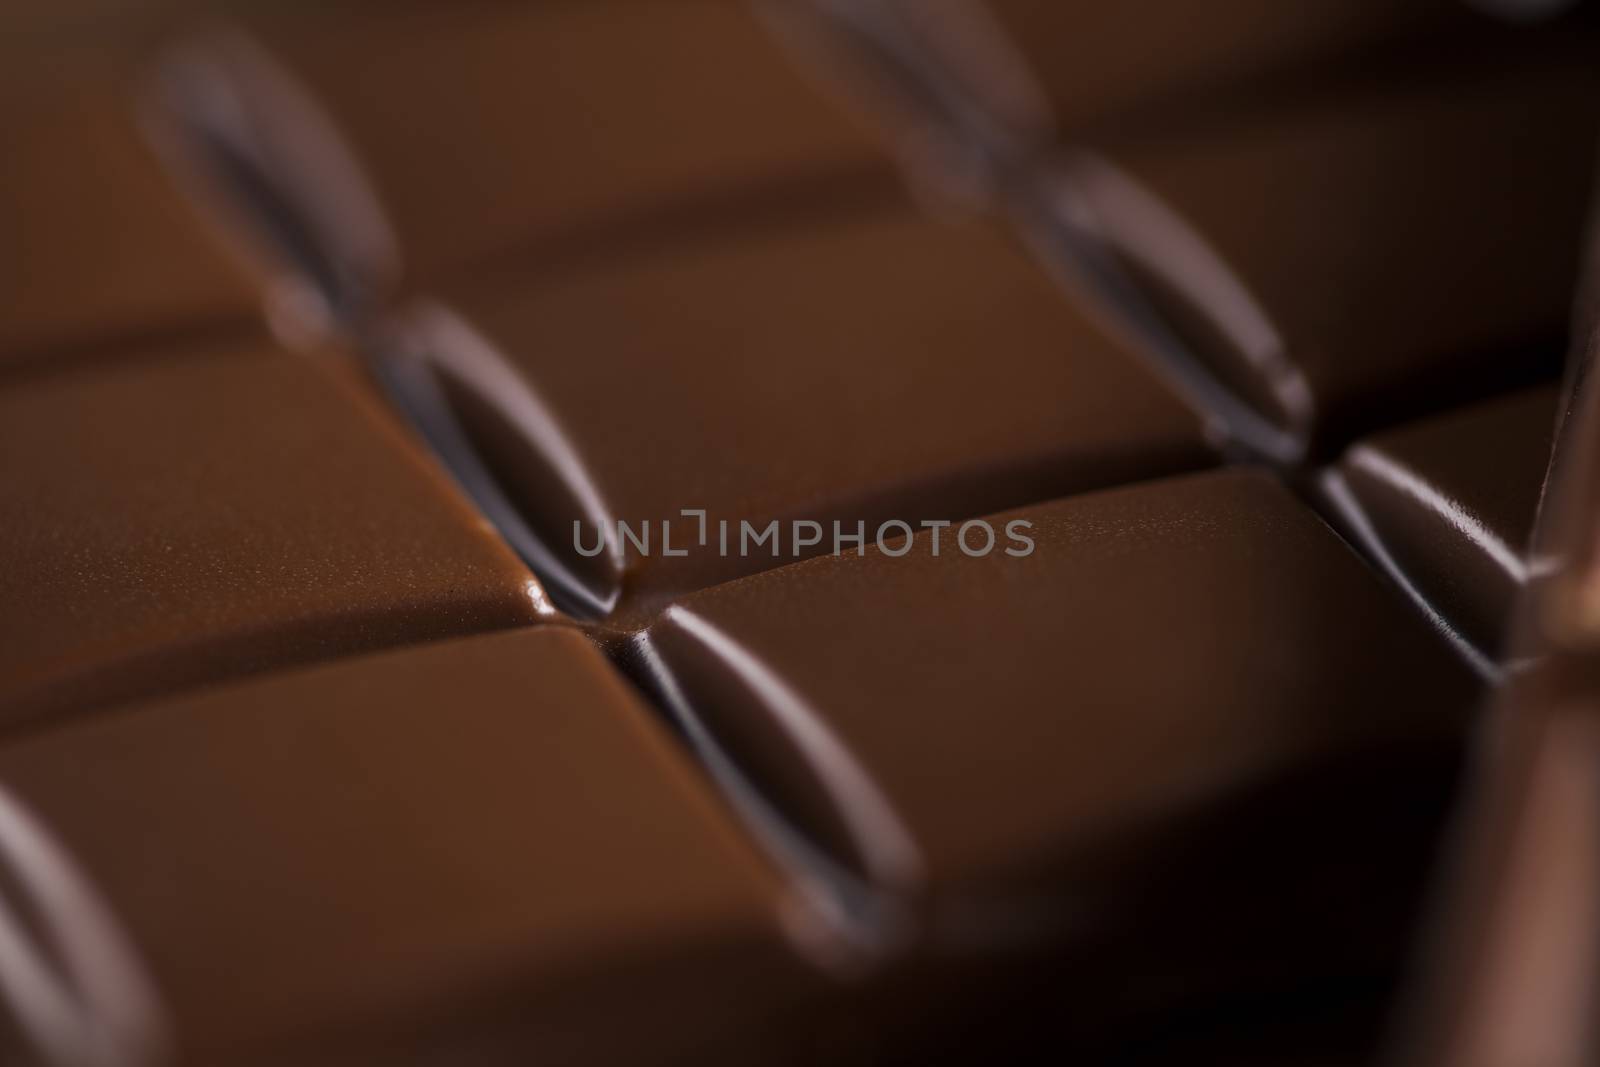 Dark and milk chocolate bar on a wooden table  by JanPietruszka